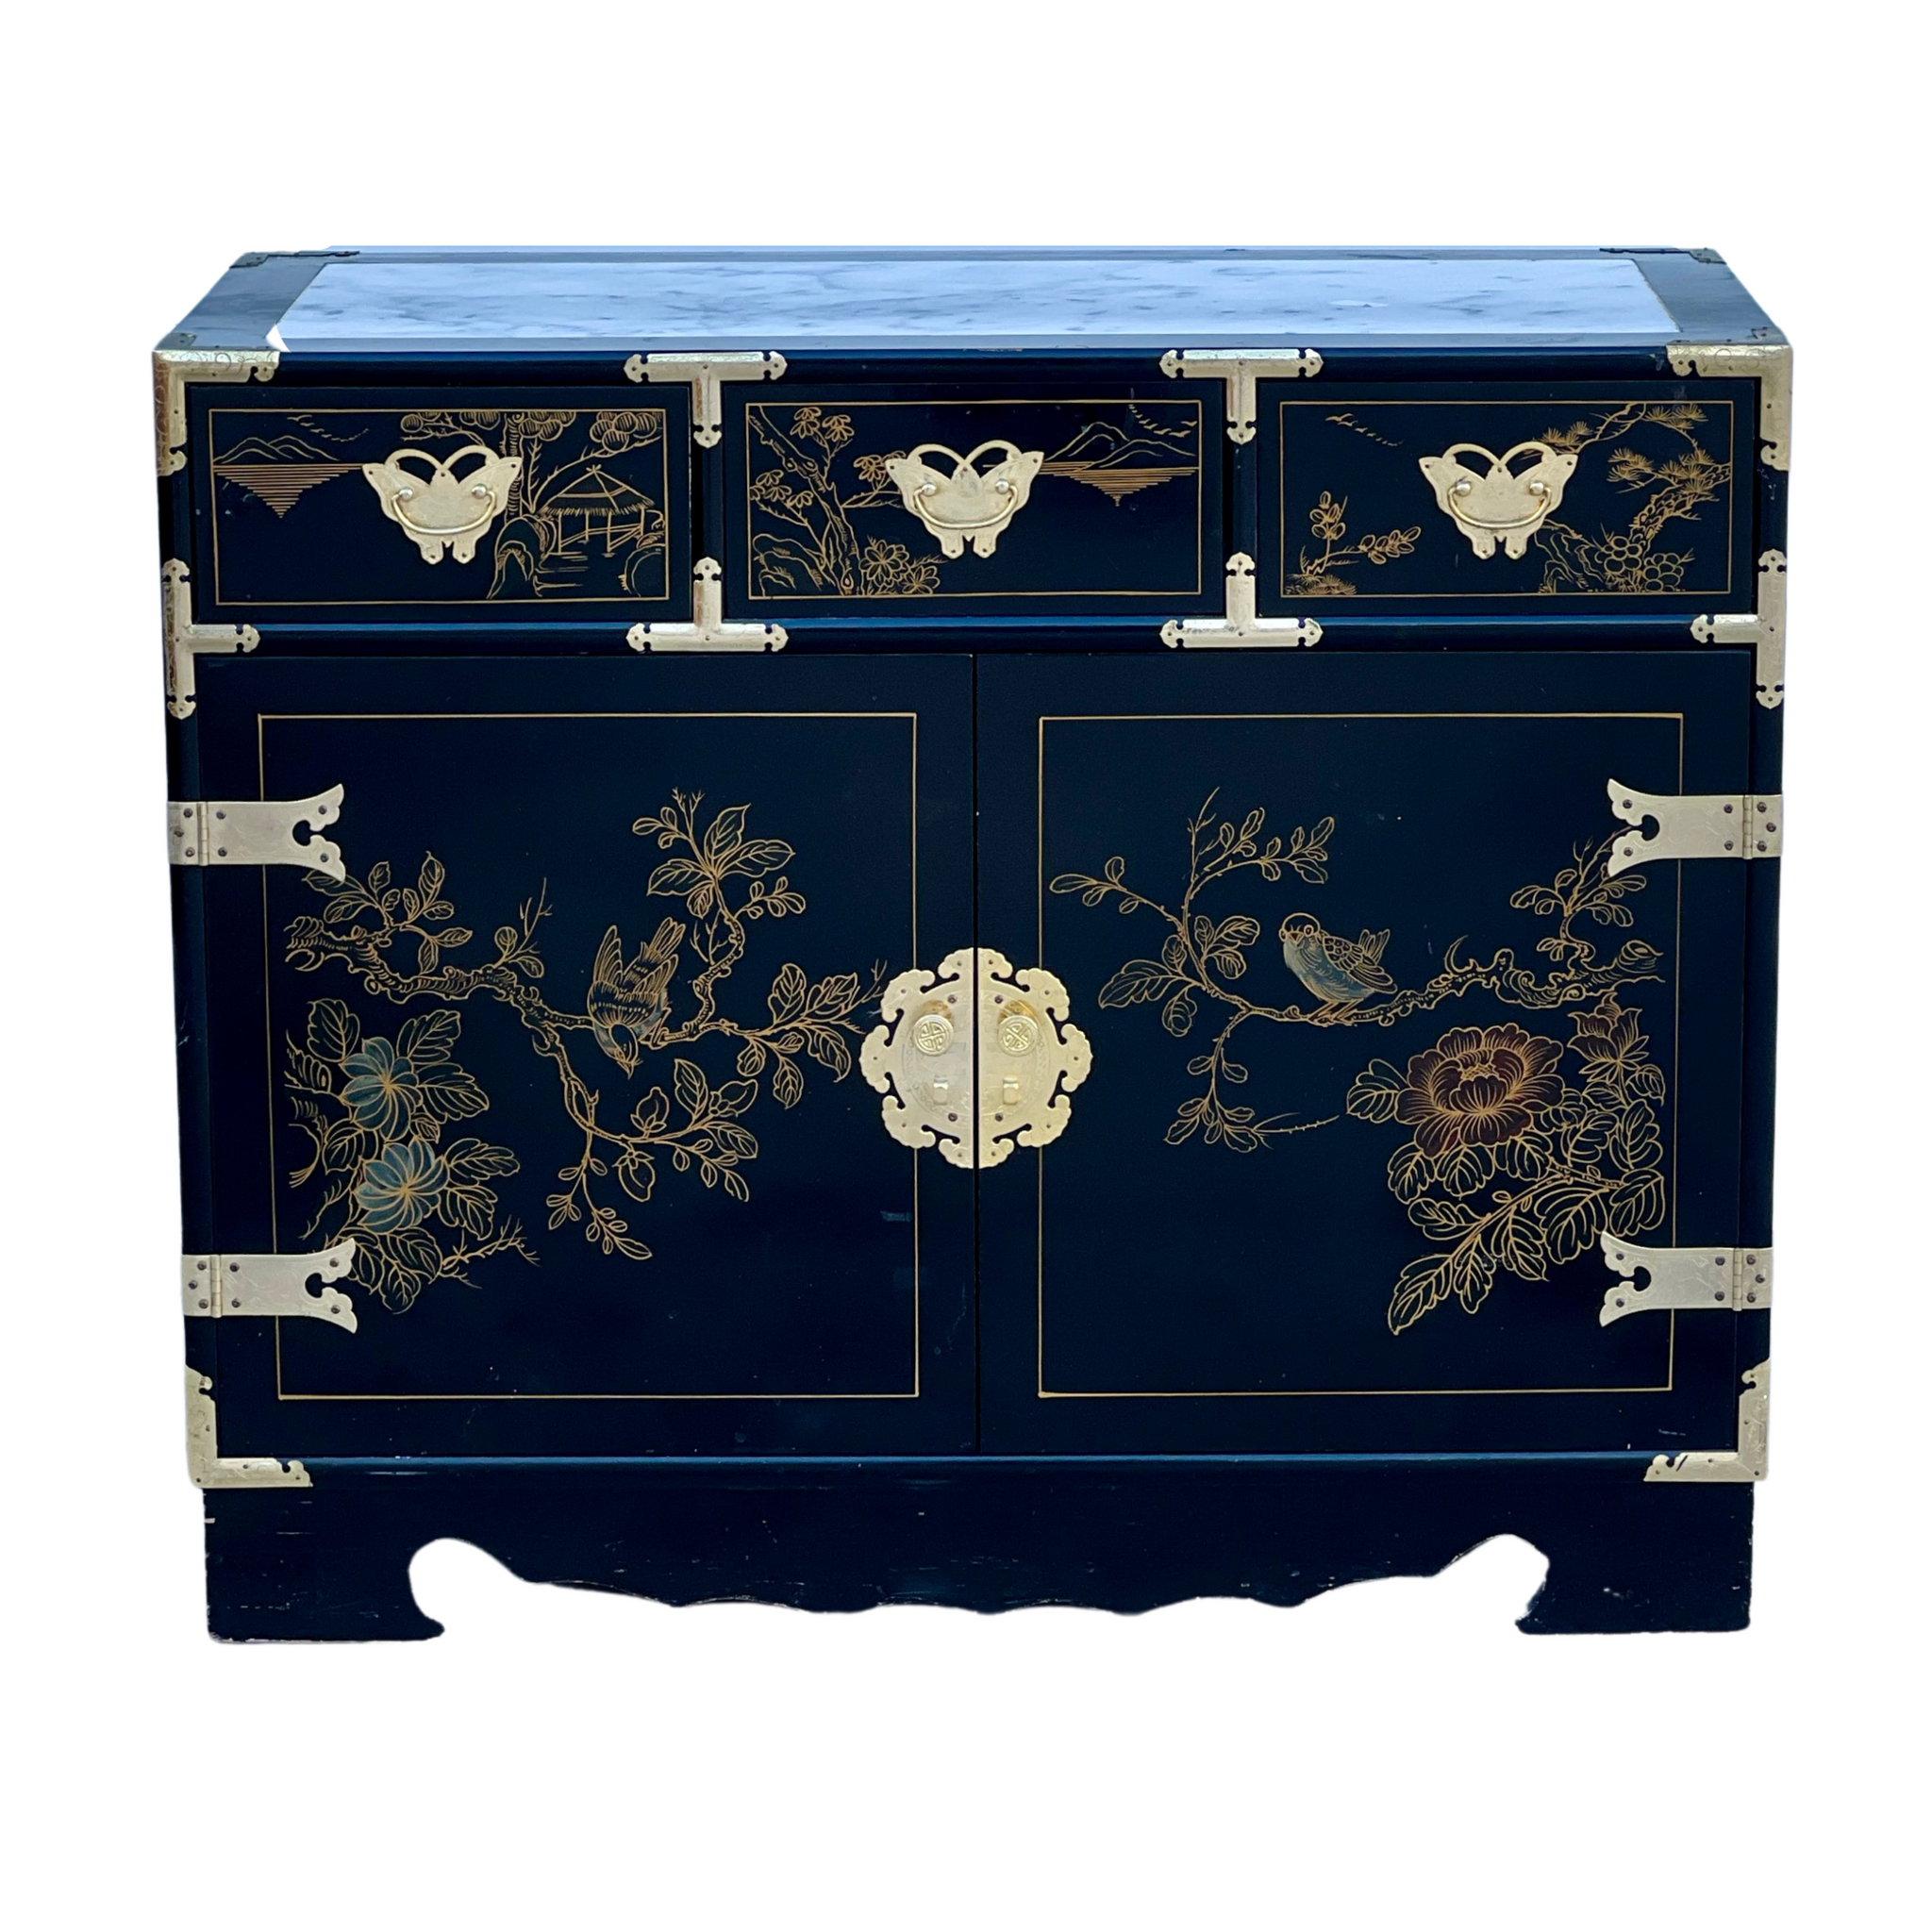 Stunning Vintage Chinoiserie Style Marble Top Server Available for Custom Lacquer